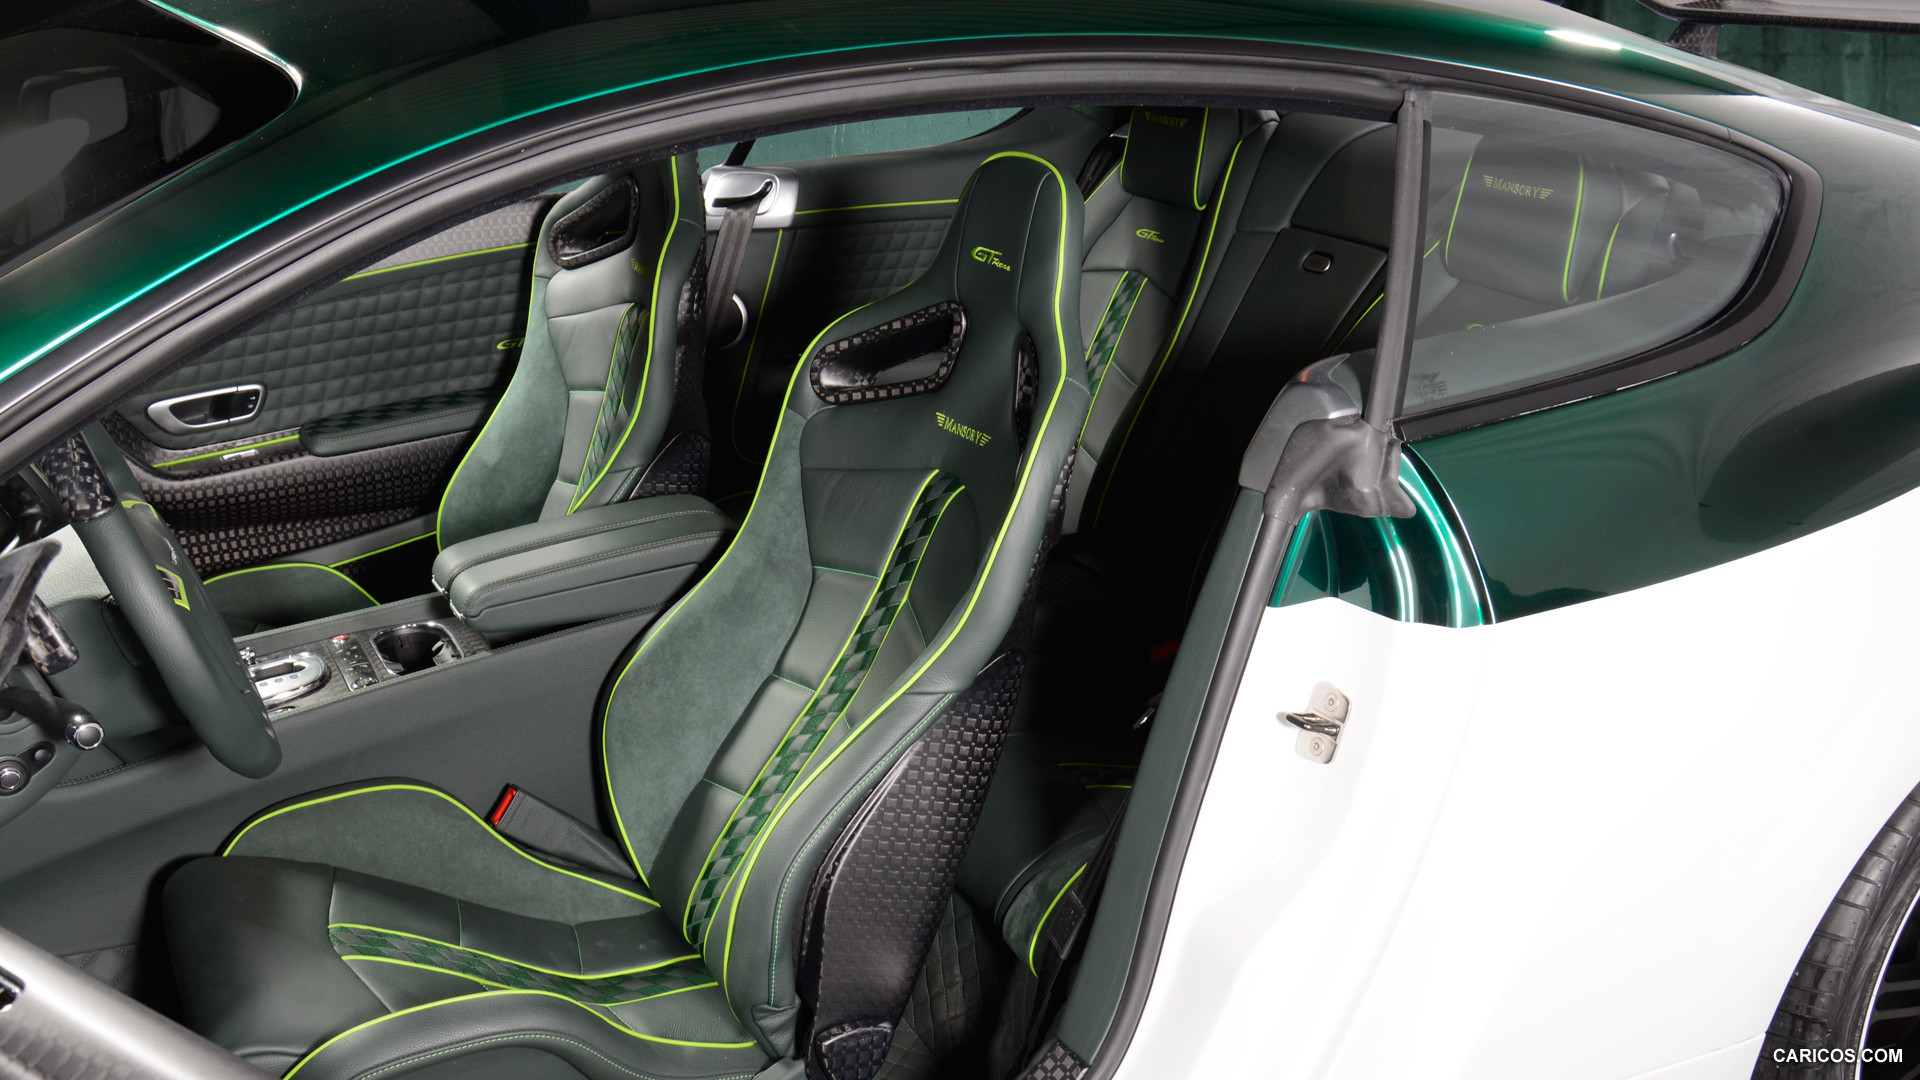 2015 Mansory GT Race based on Bentley Continental GT  - Interior, #6 of 7